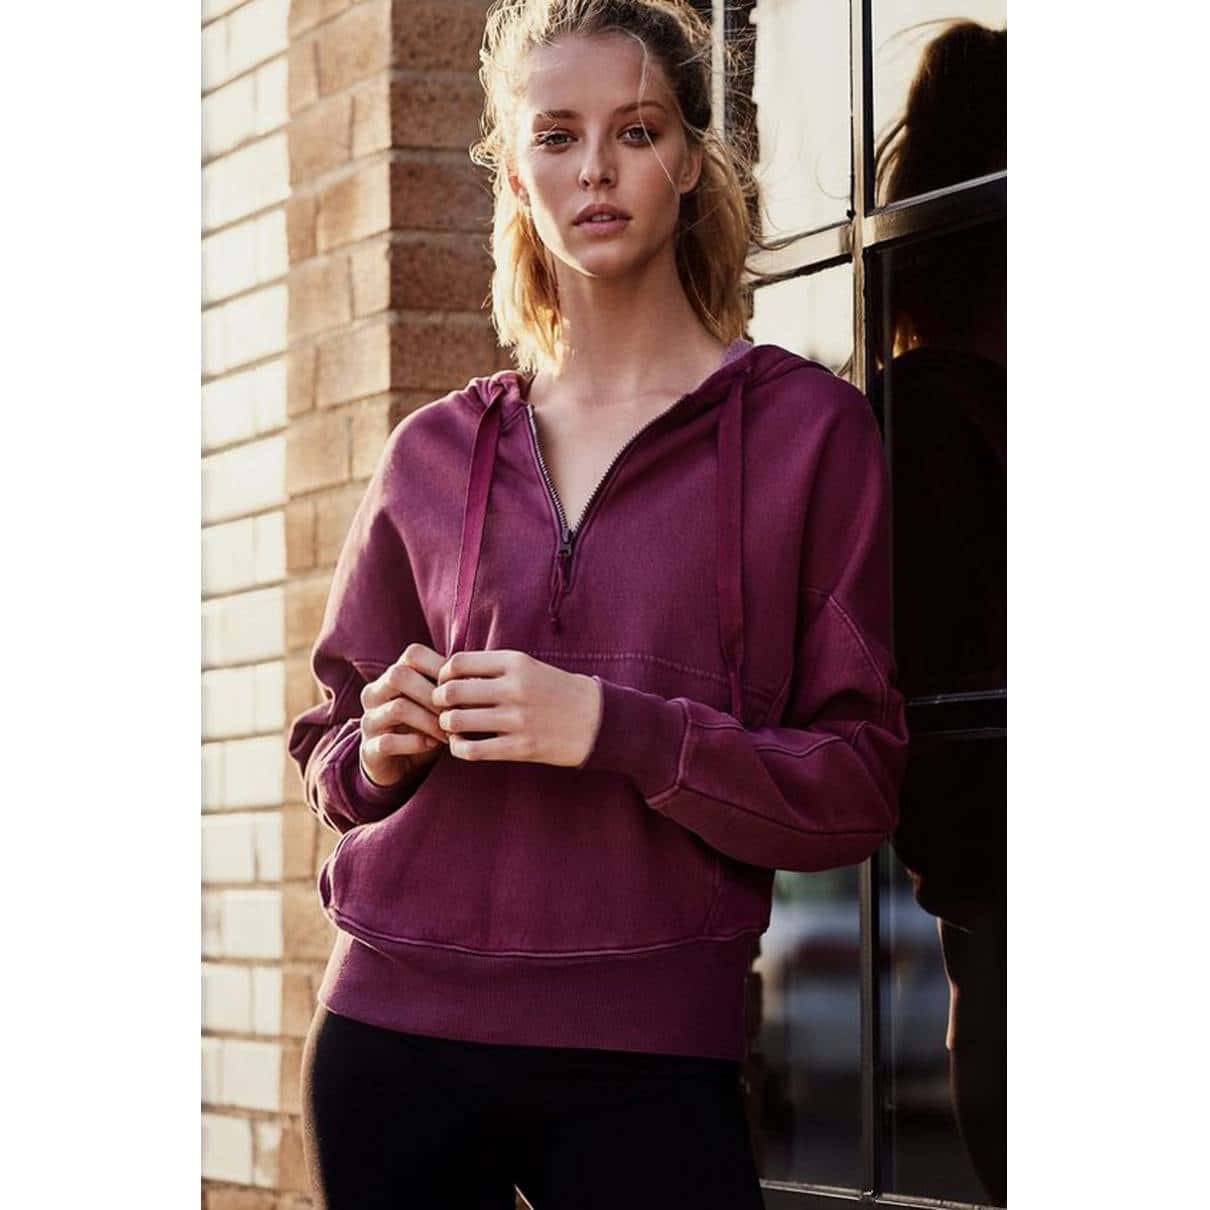 Stay comfy and stylish with this soft and cozy purple sweatshirt. Wallpaper